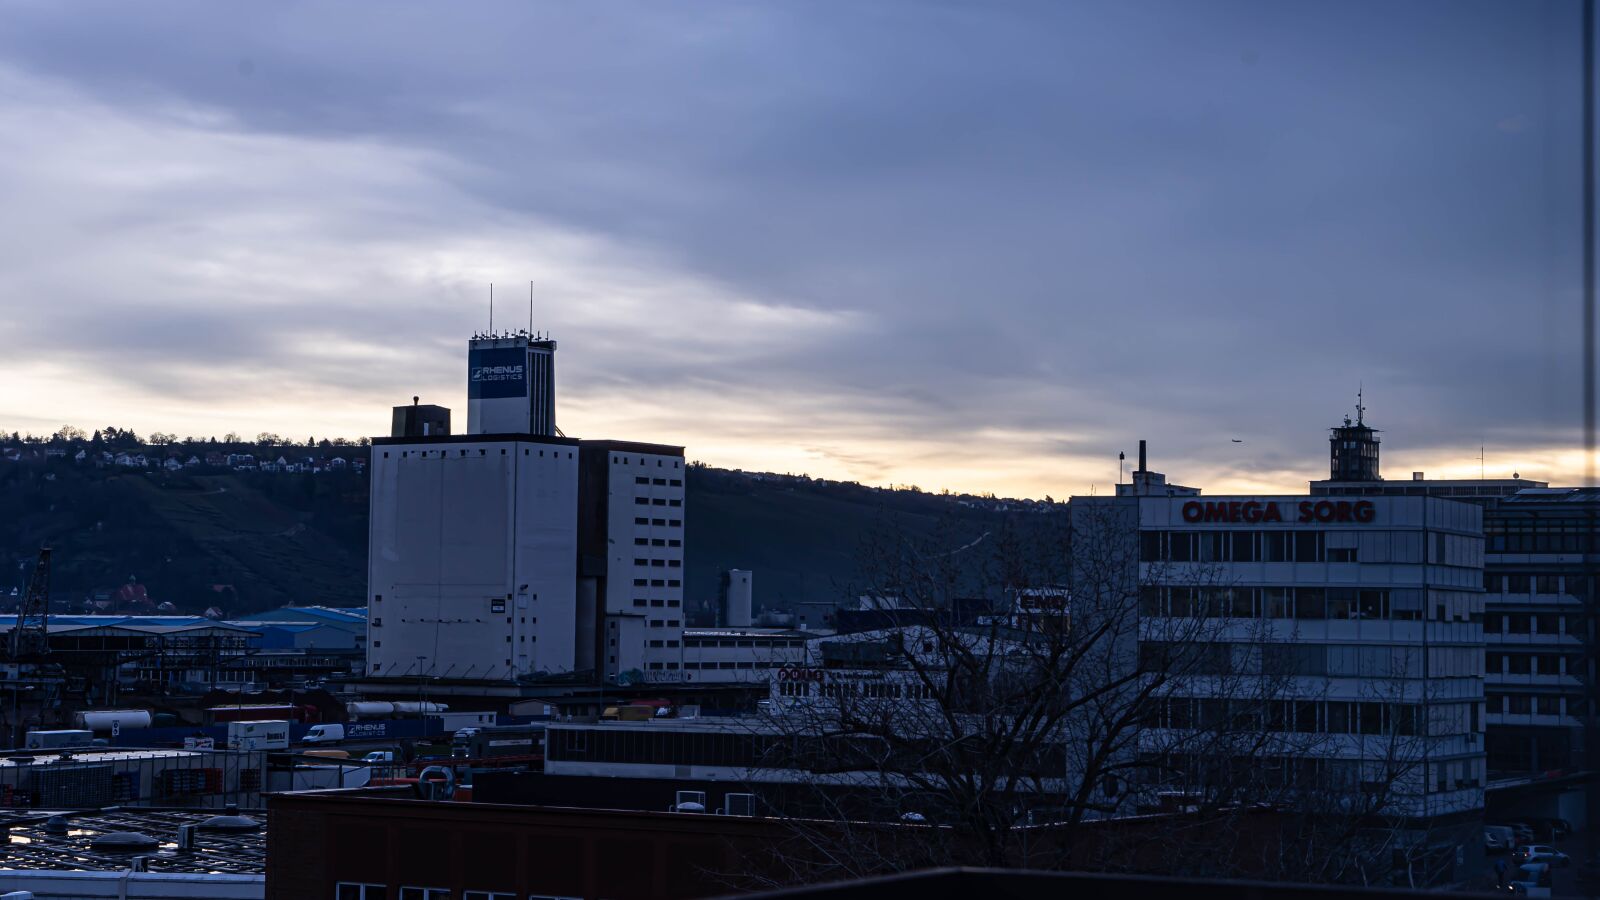 Sony a7 II sample photo. City, industry, clouds photography